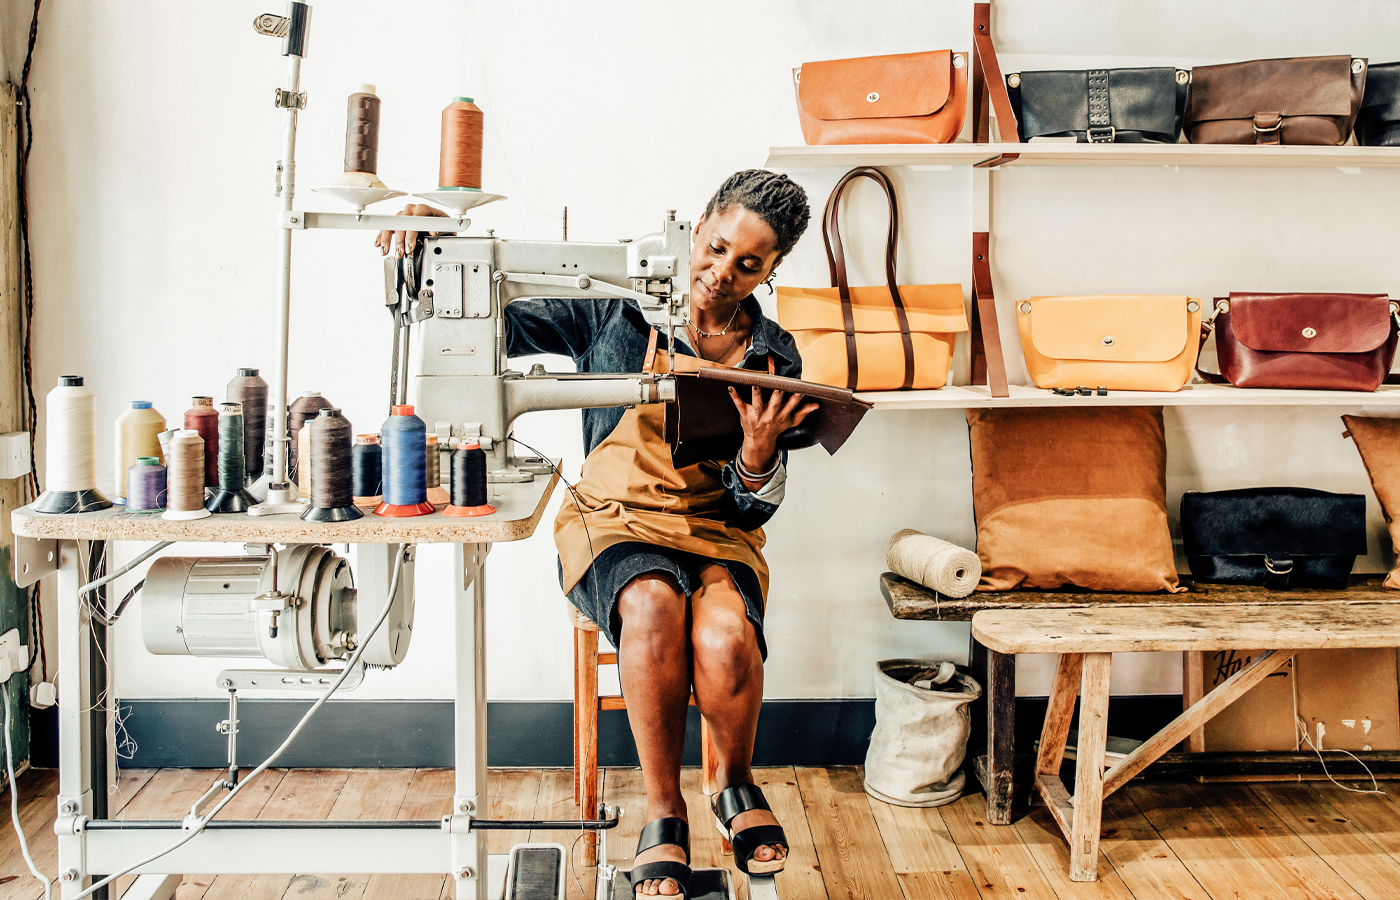 woman-at-sewing-machine-with-leather-bags-hero-image